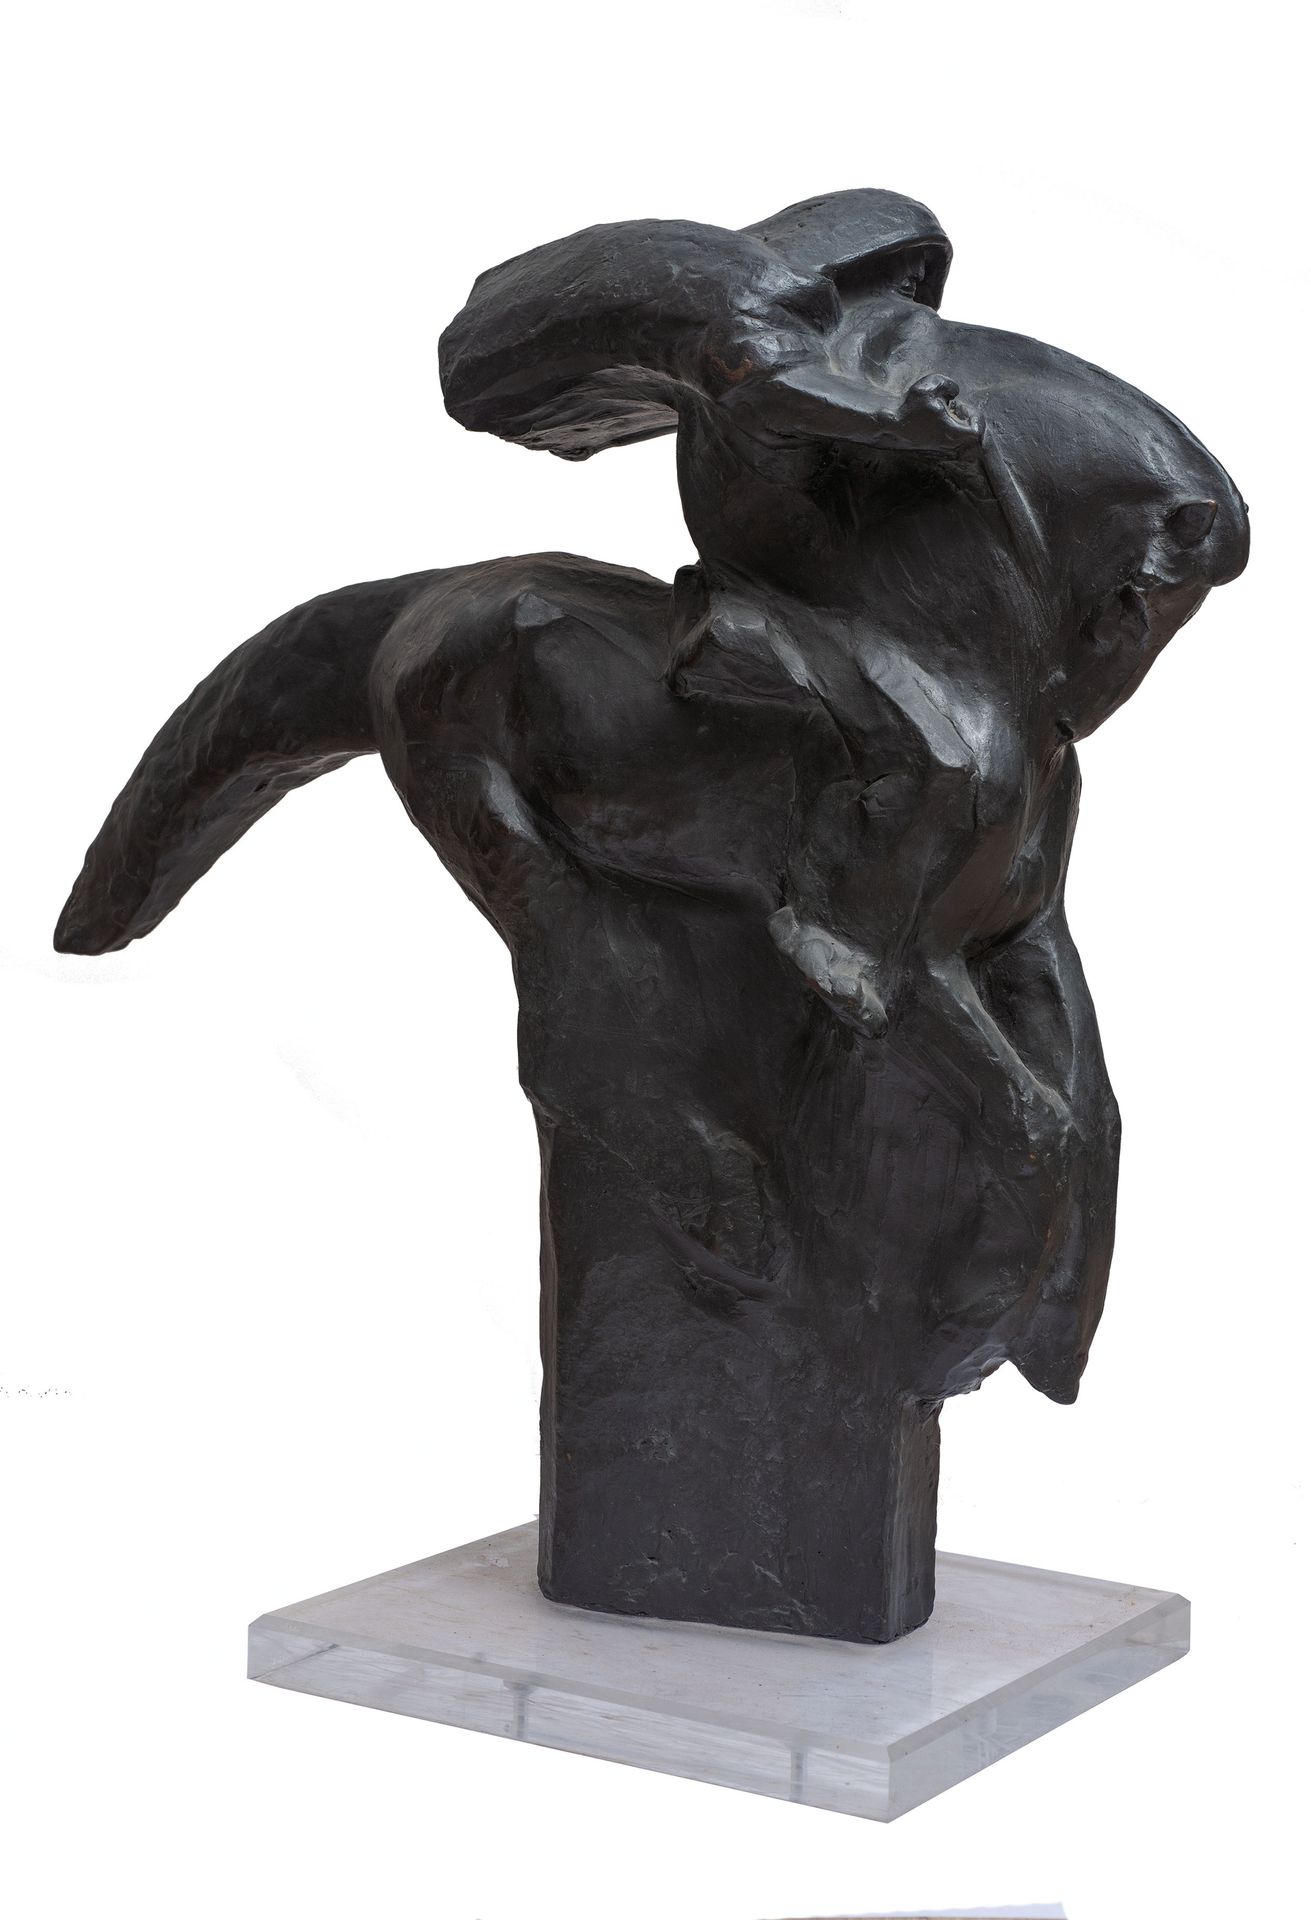 DUILIO CAMBELLOTTI Roma 1876 ; 1960
Magister Equitum, 1924-25
Bronce, 67 x 65 x &hellip;